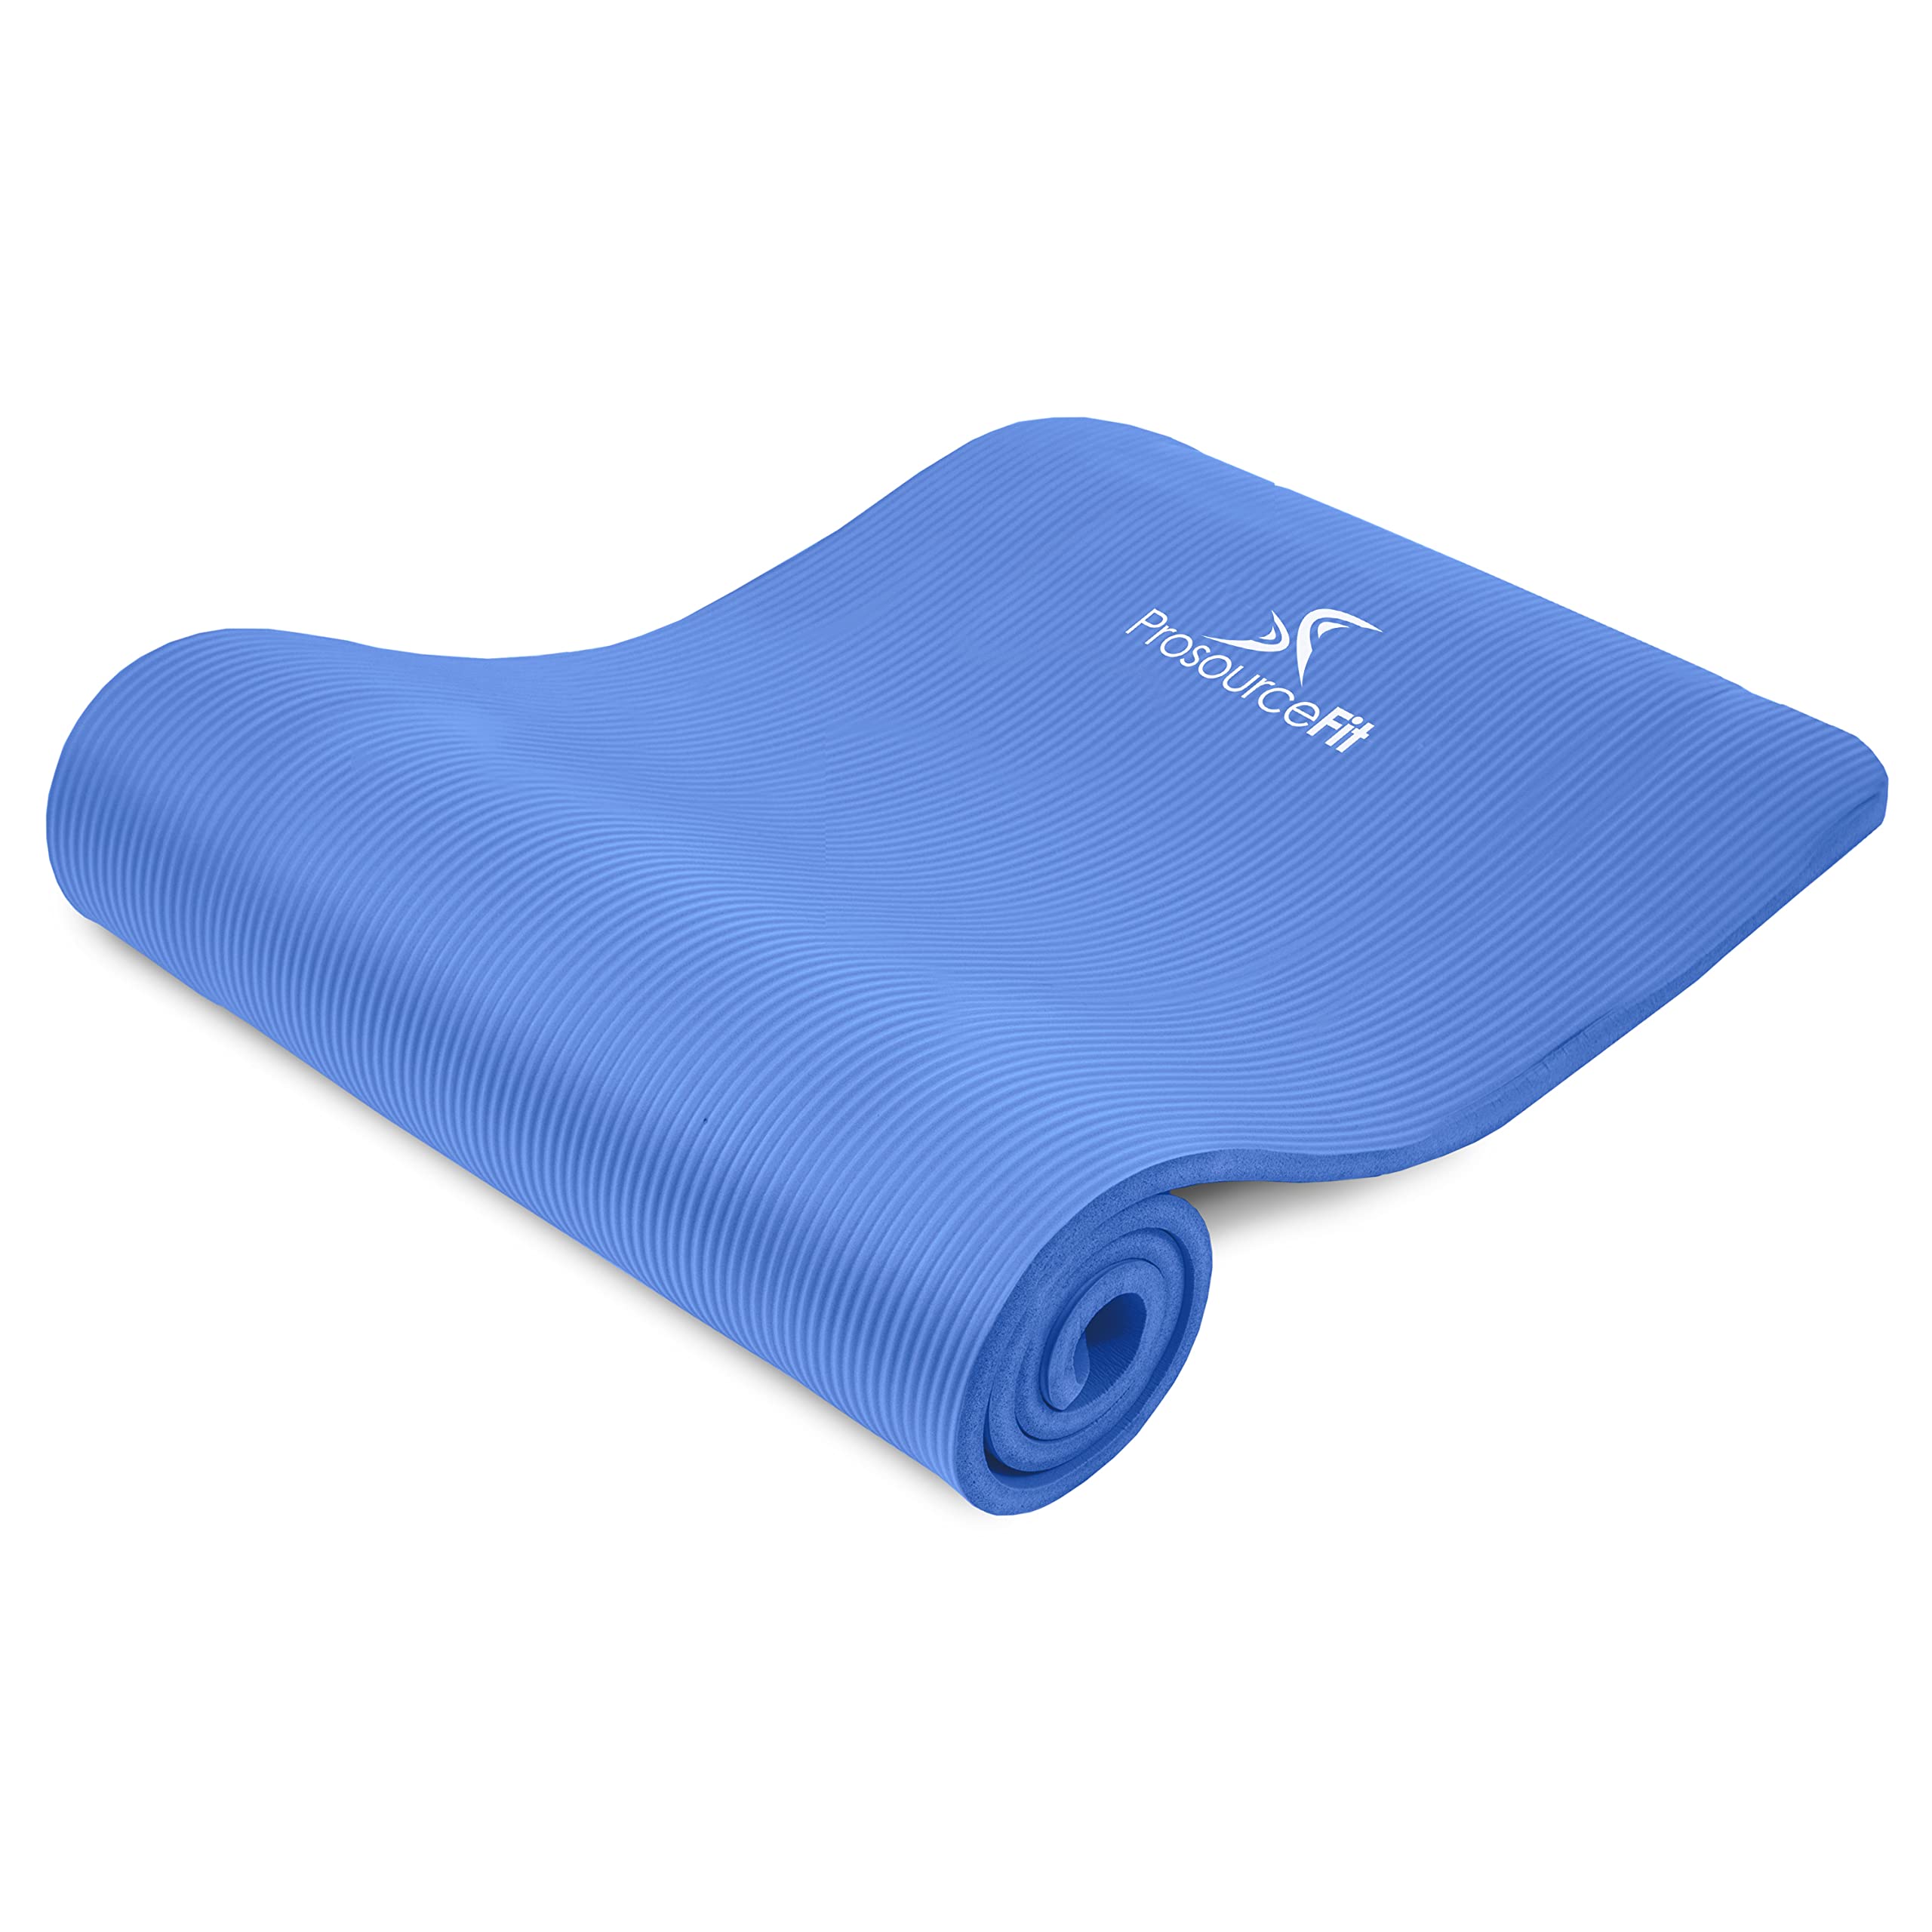 Extra Thick Yoga and Pilates Mat 1/2 inch